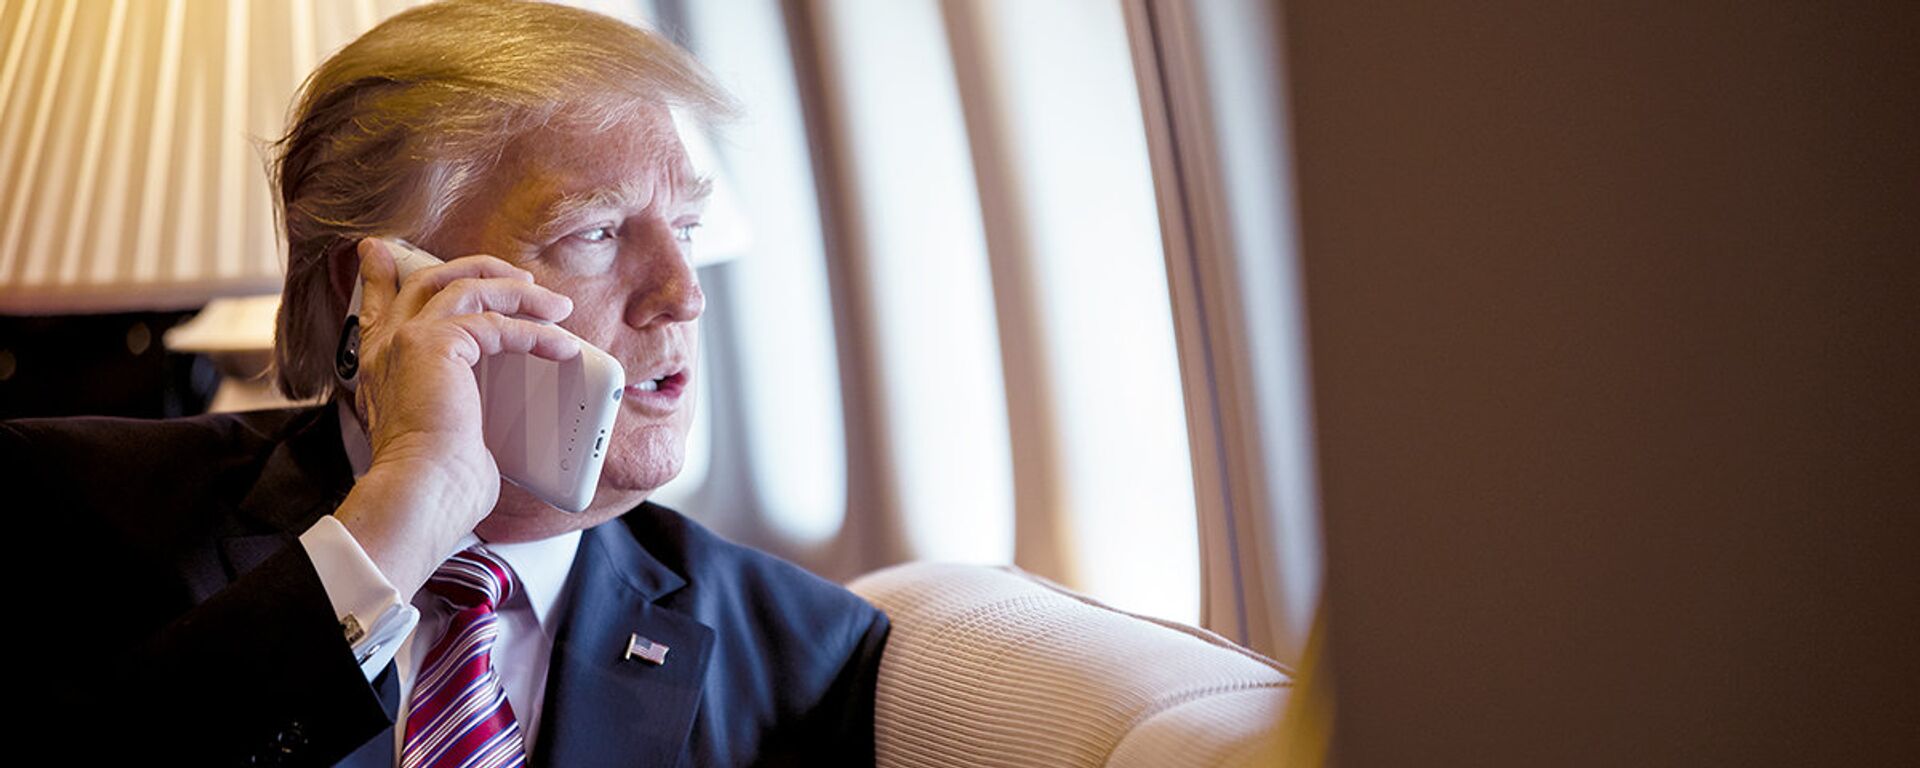 President Donald Trump talks on the phone aboard Air Force One during a flight to Philadelphia, Pennsylvania, to address a joint gathering of House and Senate Republicans, Thursday, January 26, 2017 (File photo). - Sputnik International, 1920, 04.12.2020